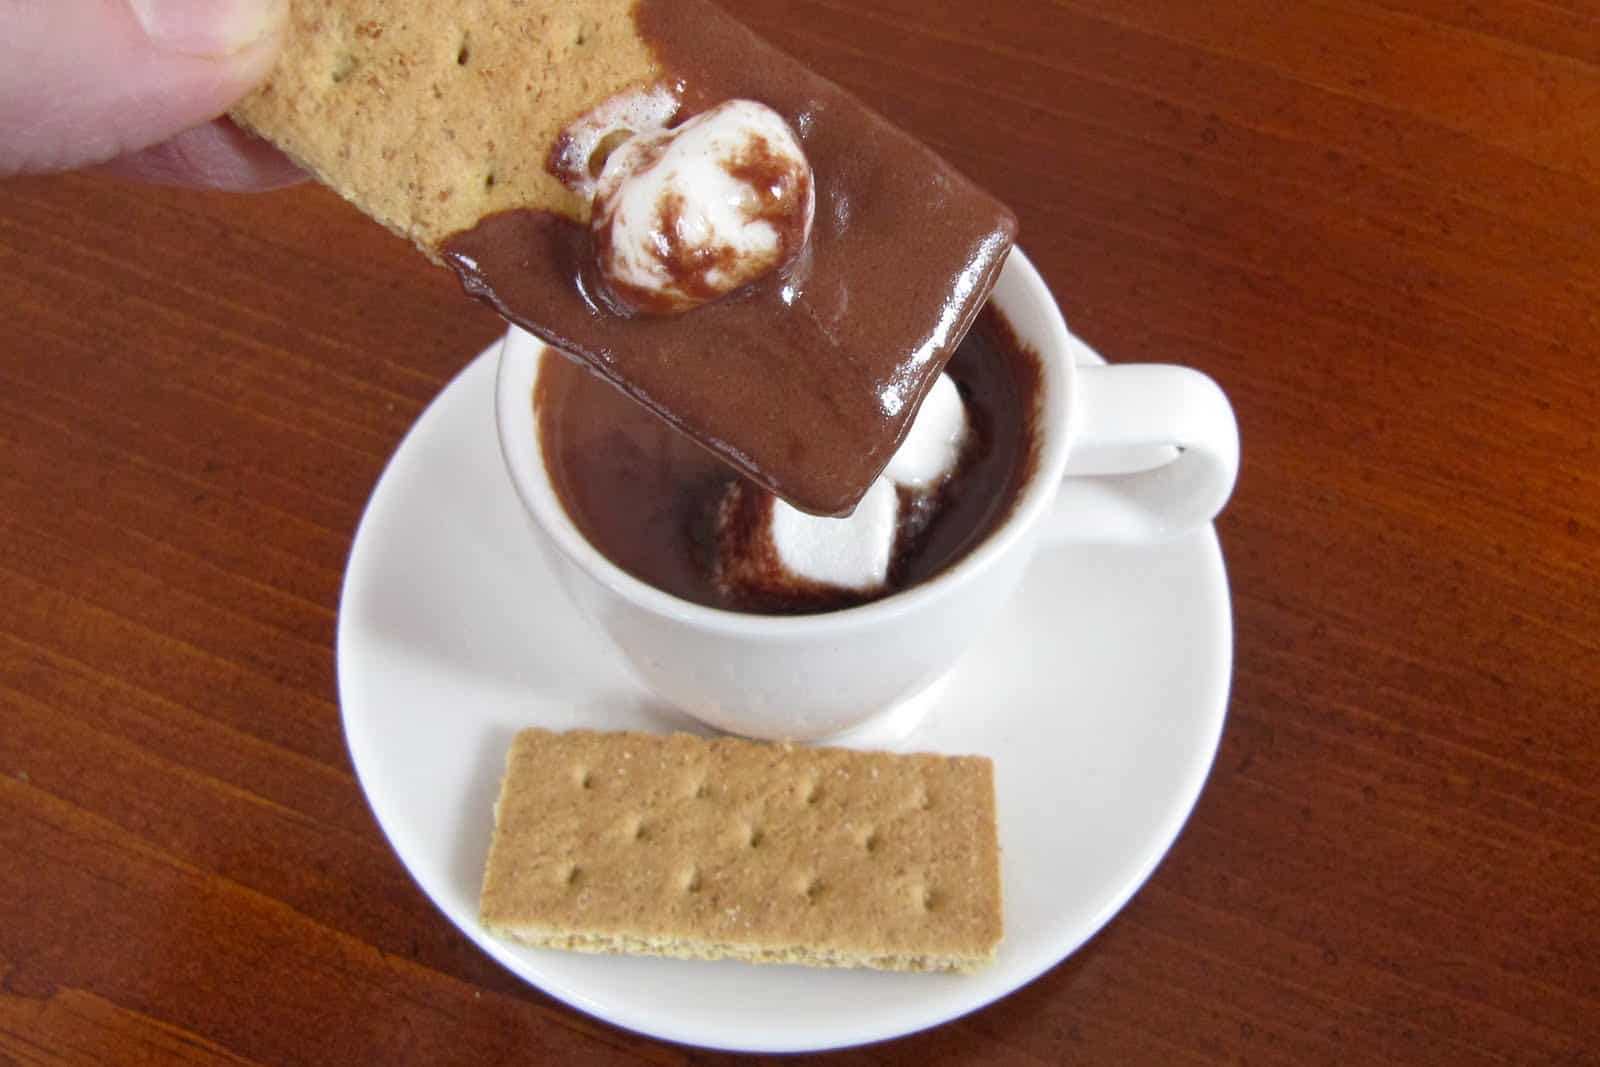 Spanish Hot Chocolate - For Sipping or Dipping